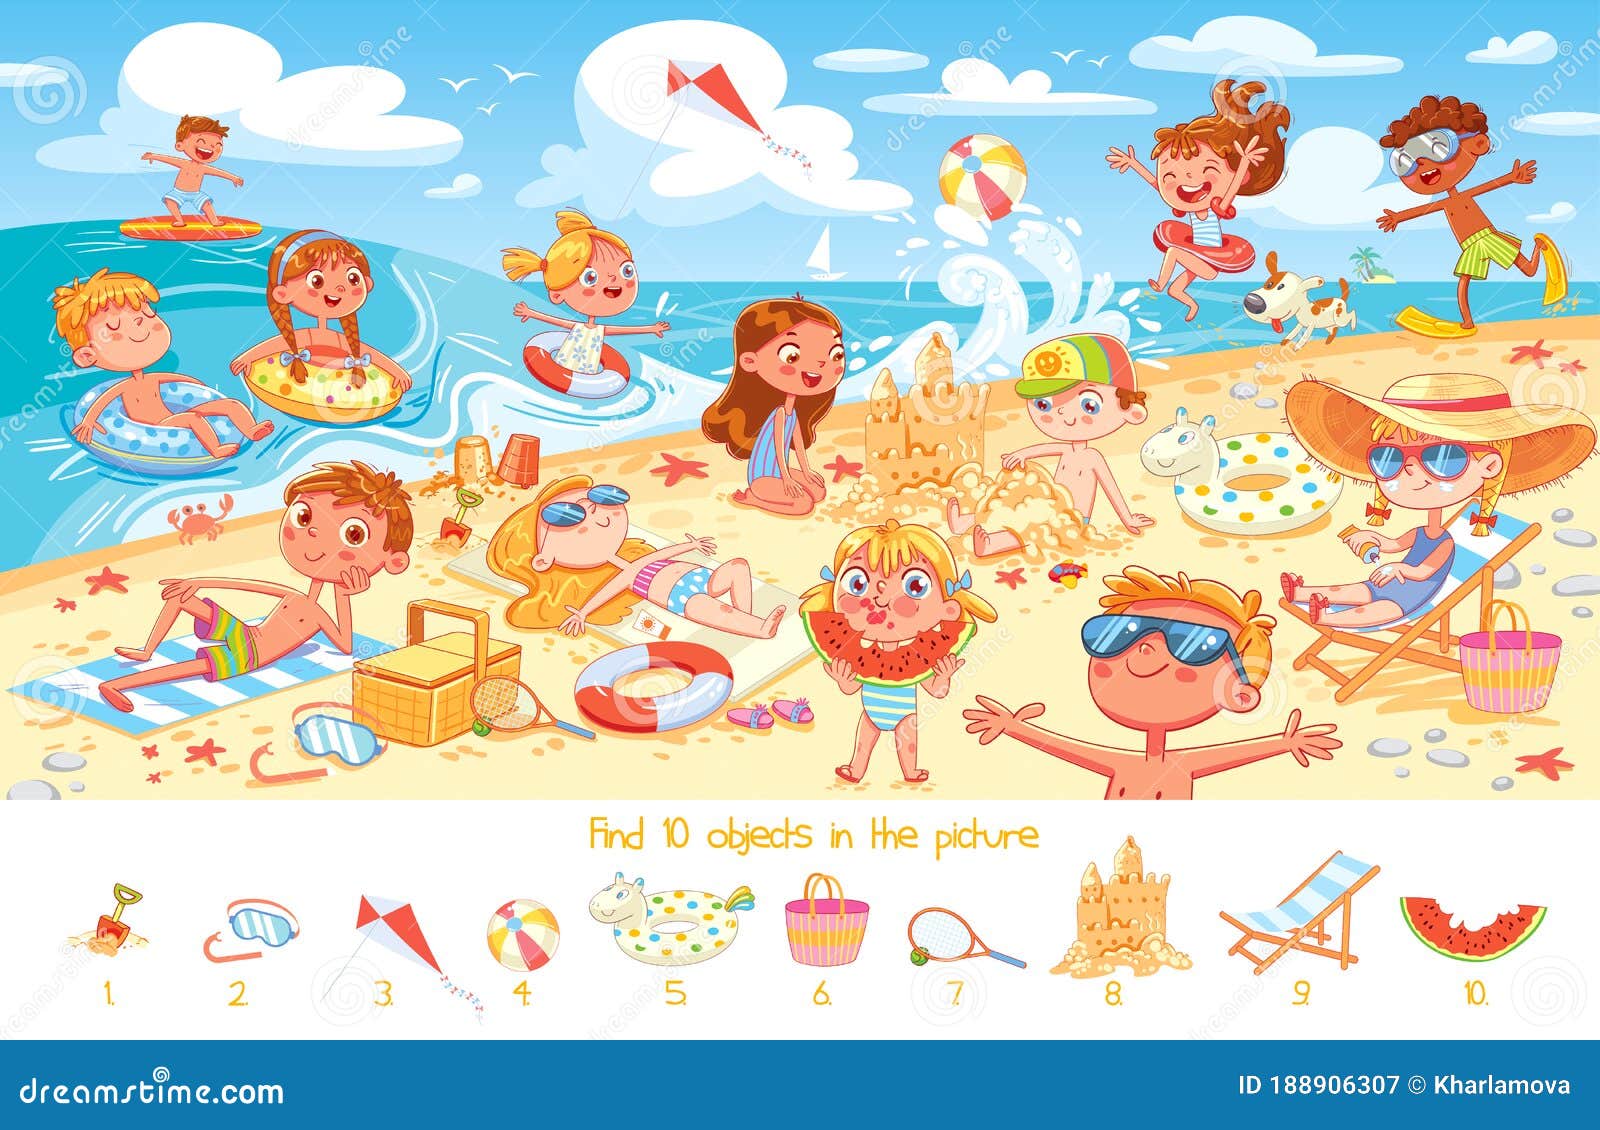 find 10 objects in the picture. group of kids having fun on beach